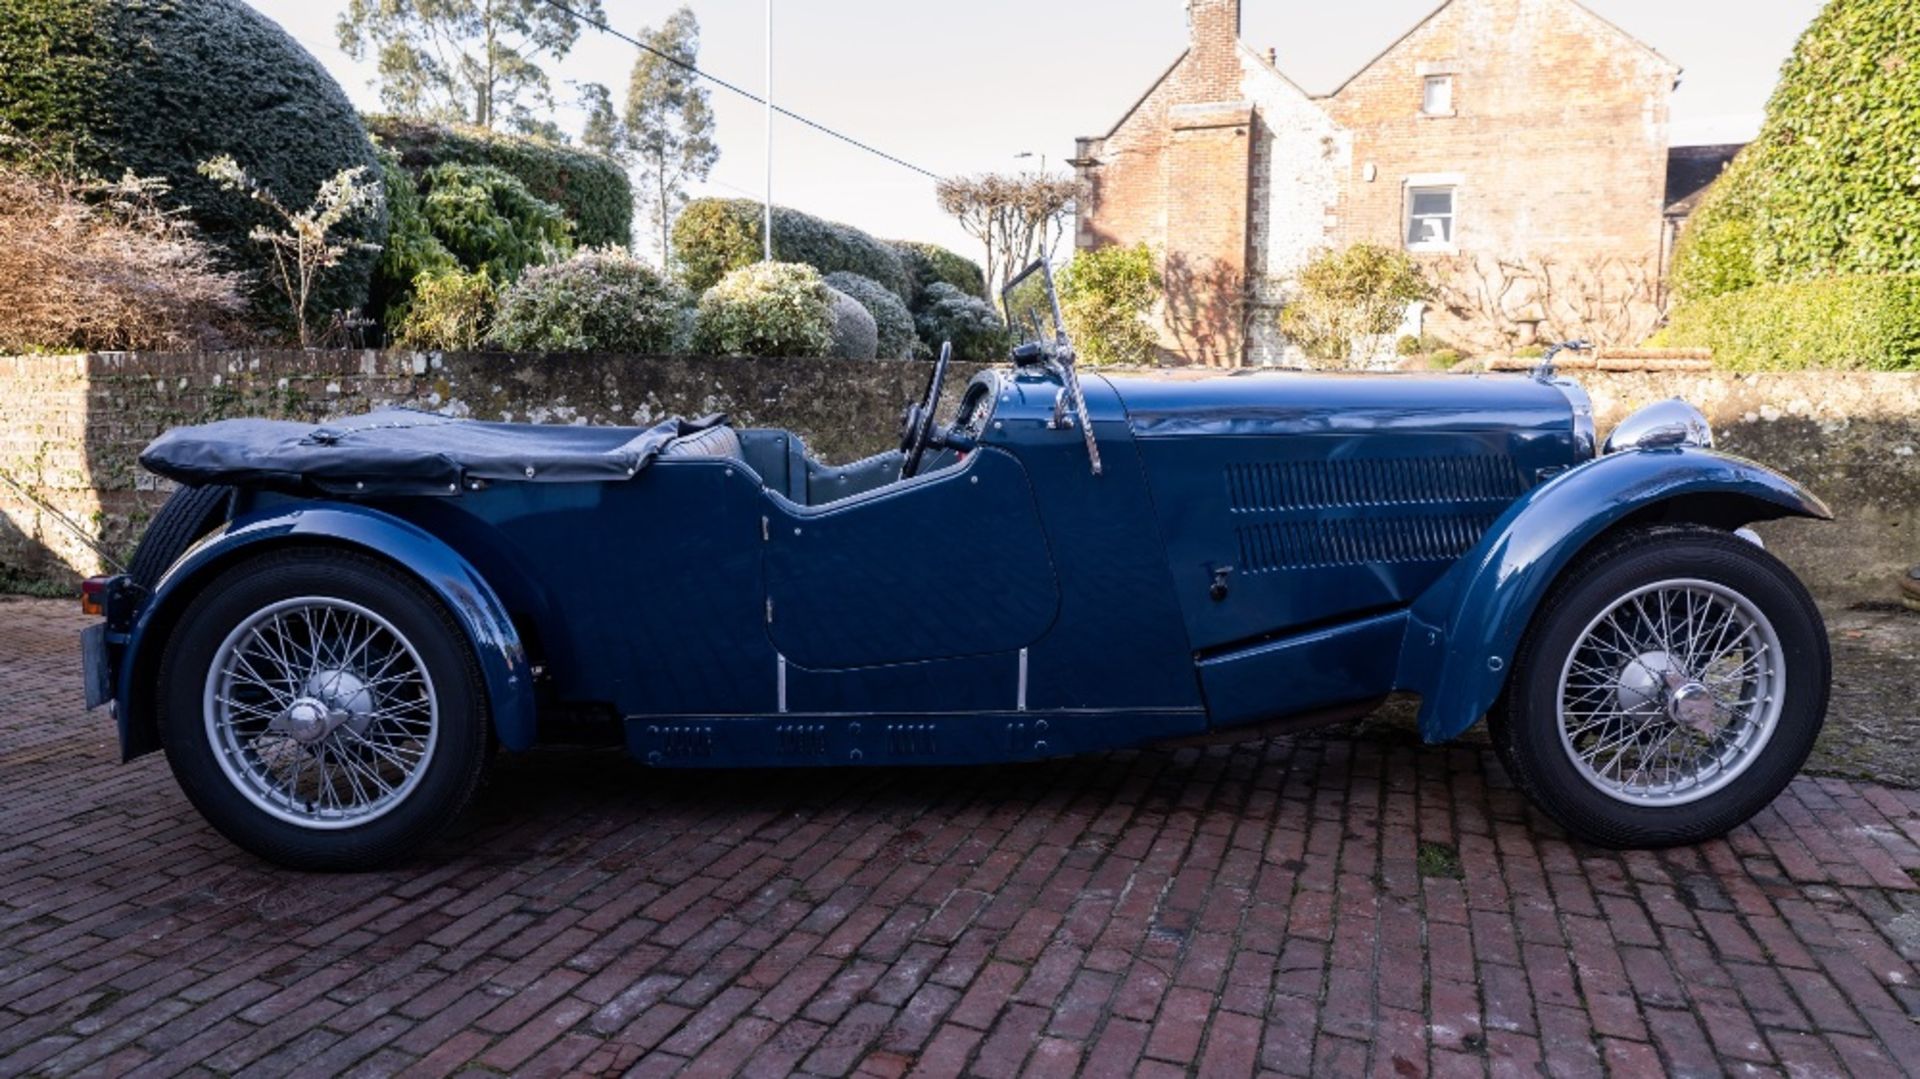 1936 AC 16/70 DROPHEAD COUPE SPECIAL - "BERTIE"                Registration Number: DPH 43 Chassis - Image 5 of 16